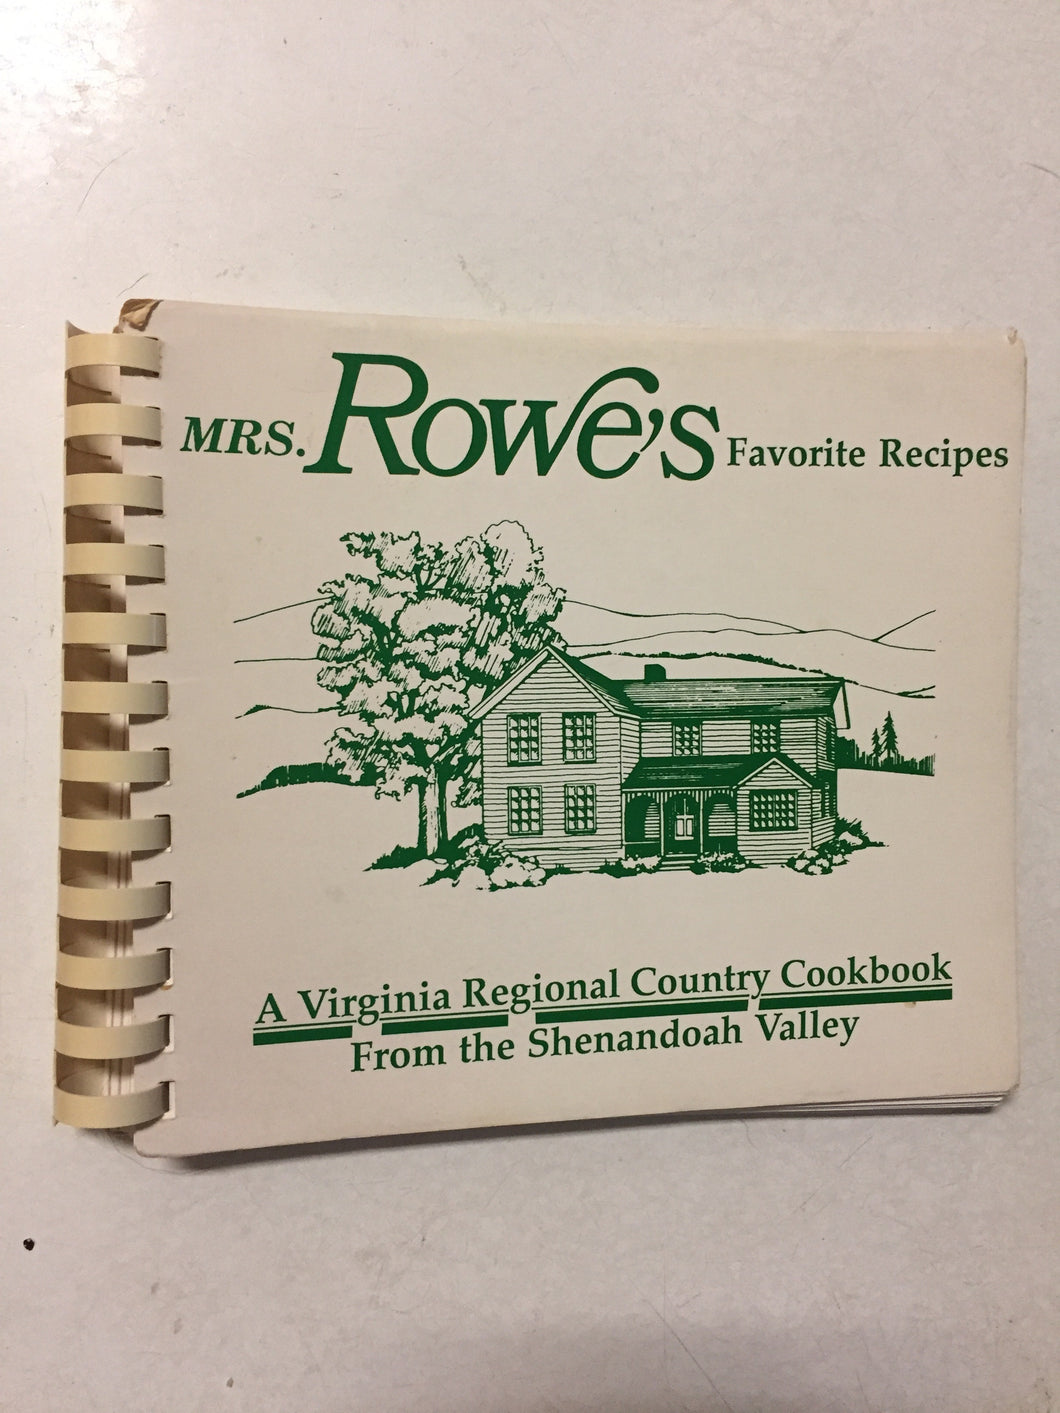 Mrs. Rowe's Favorite Recipes: A Virginia Regional Country Cookbook From the Shenandoah Valley - Slickcatbooks